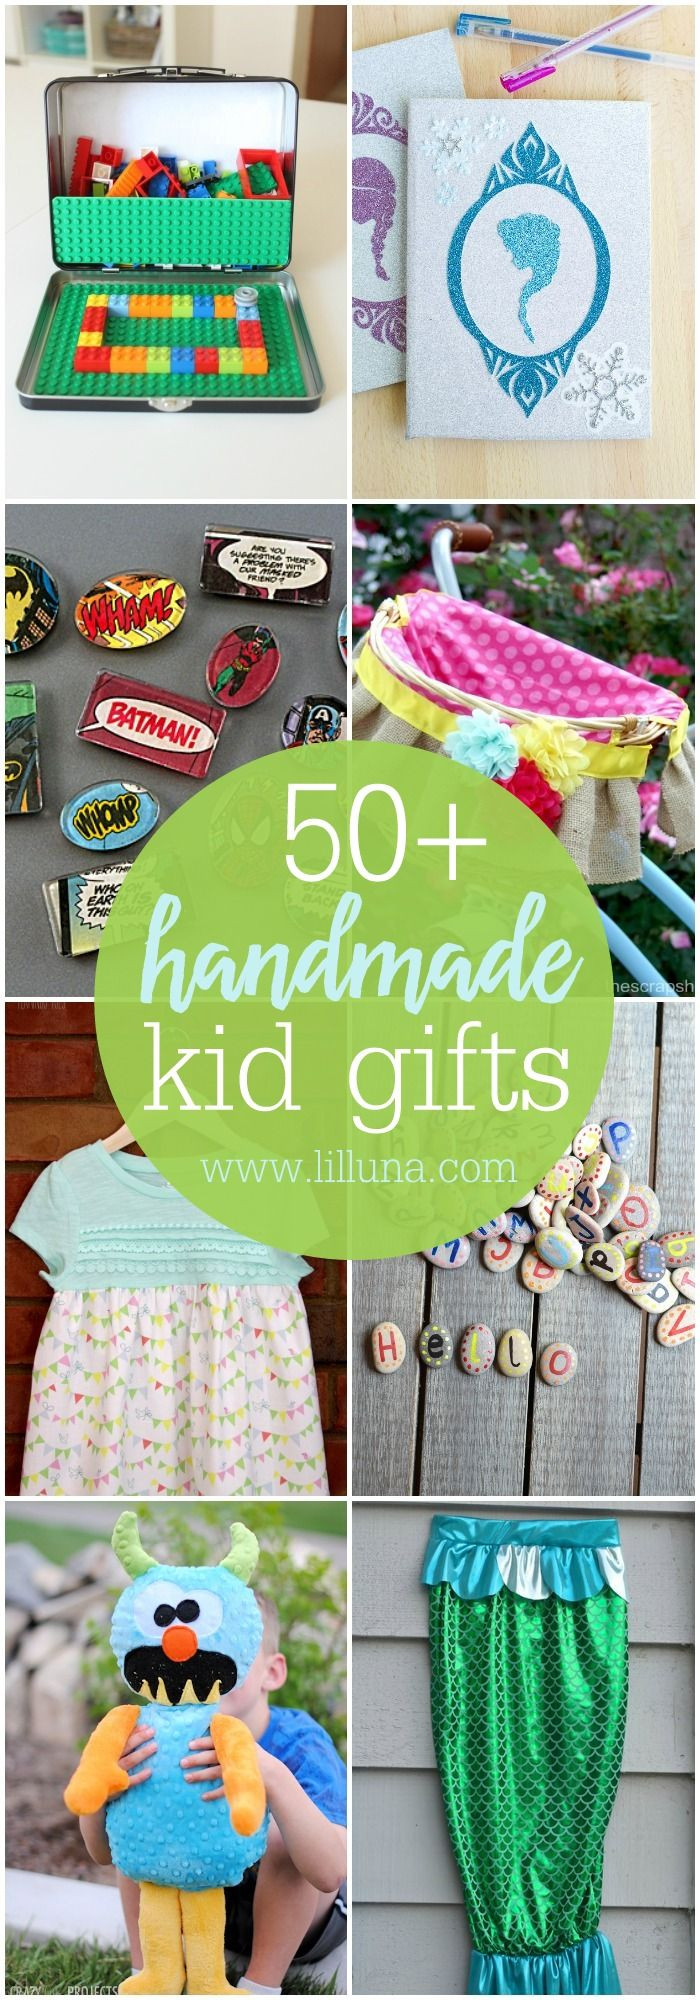 Great Gift Ideas For Kids
 50 Handmade Gift ideas for Kids so many great ideas to